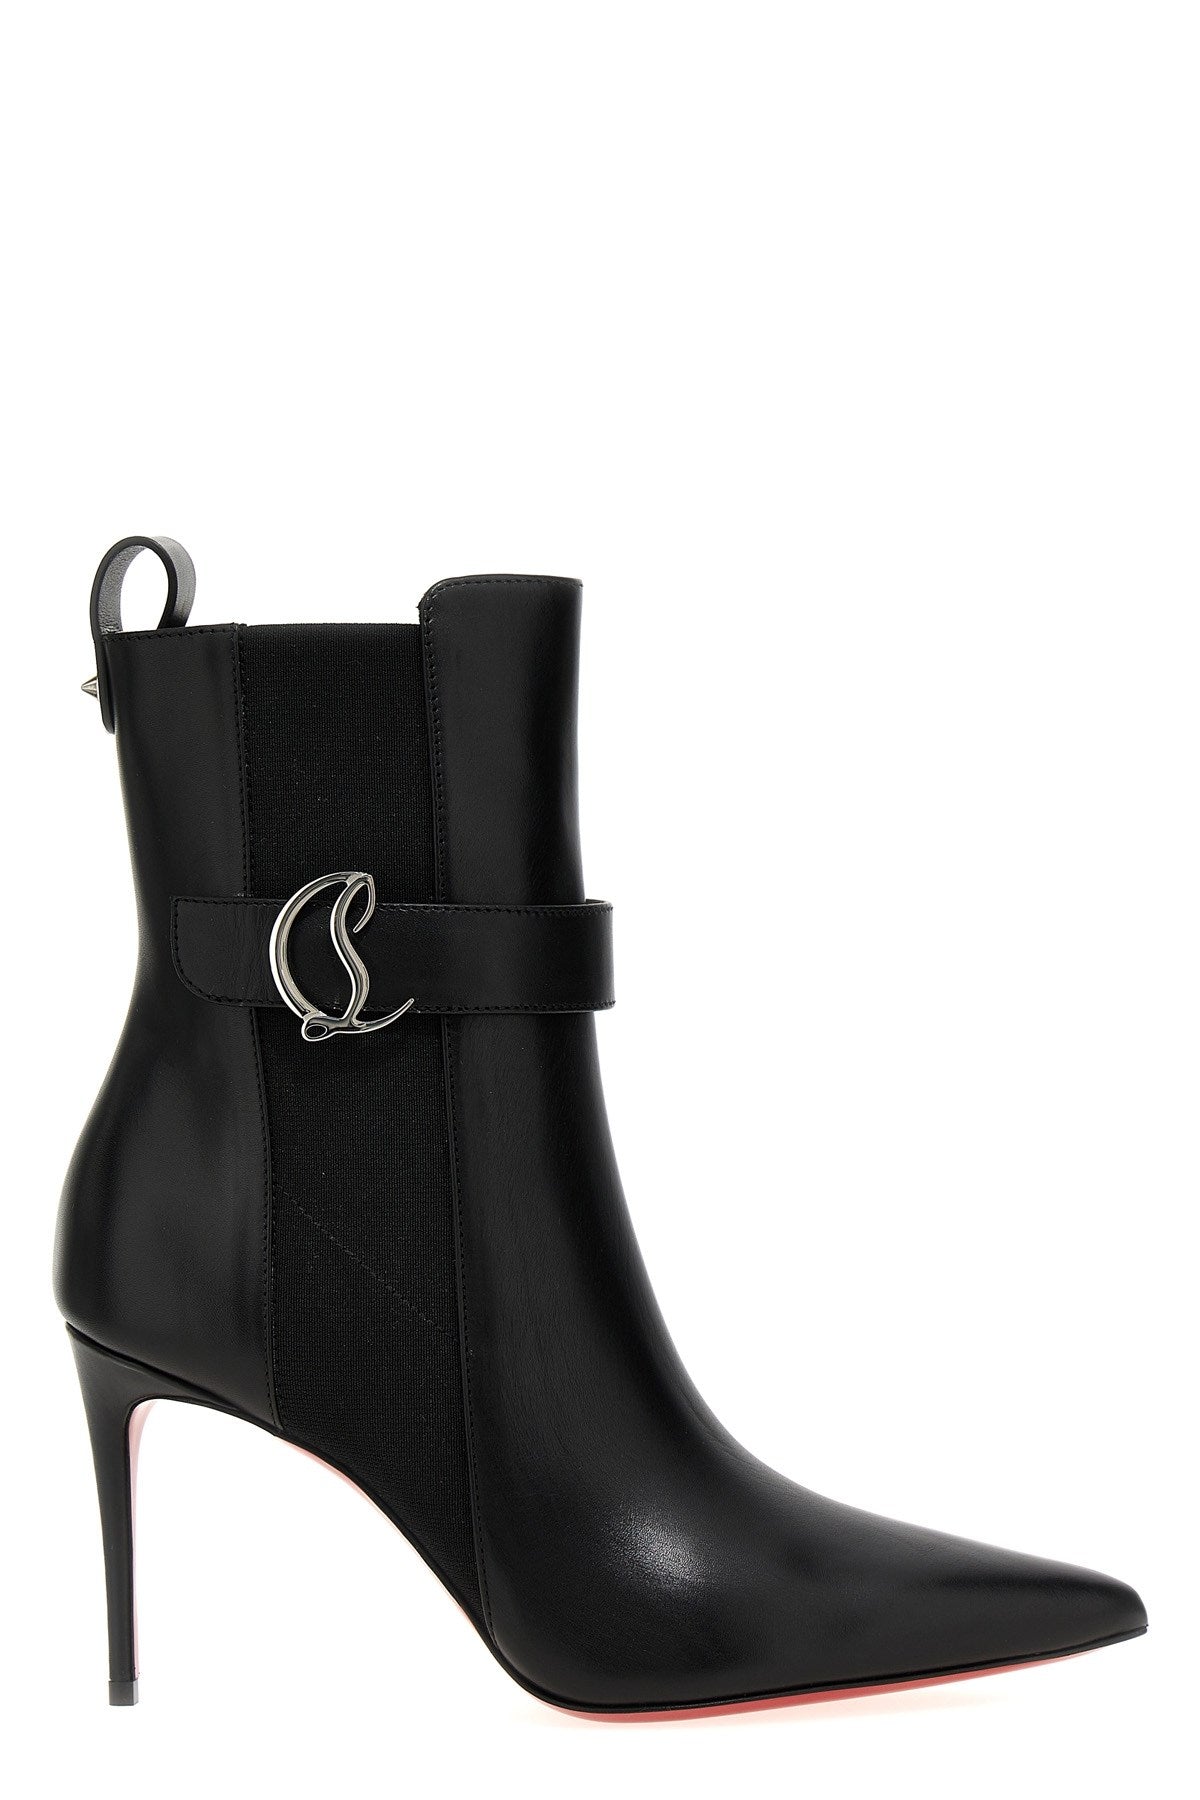 Christian Louboutin Women 'So Cl' Ankle Boots